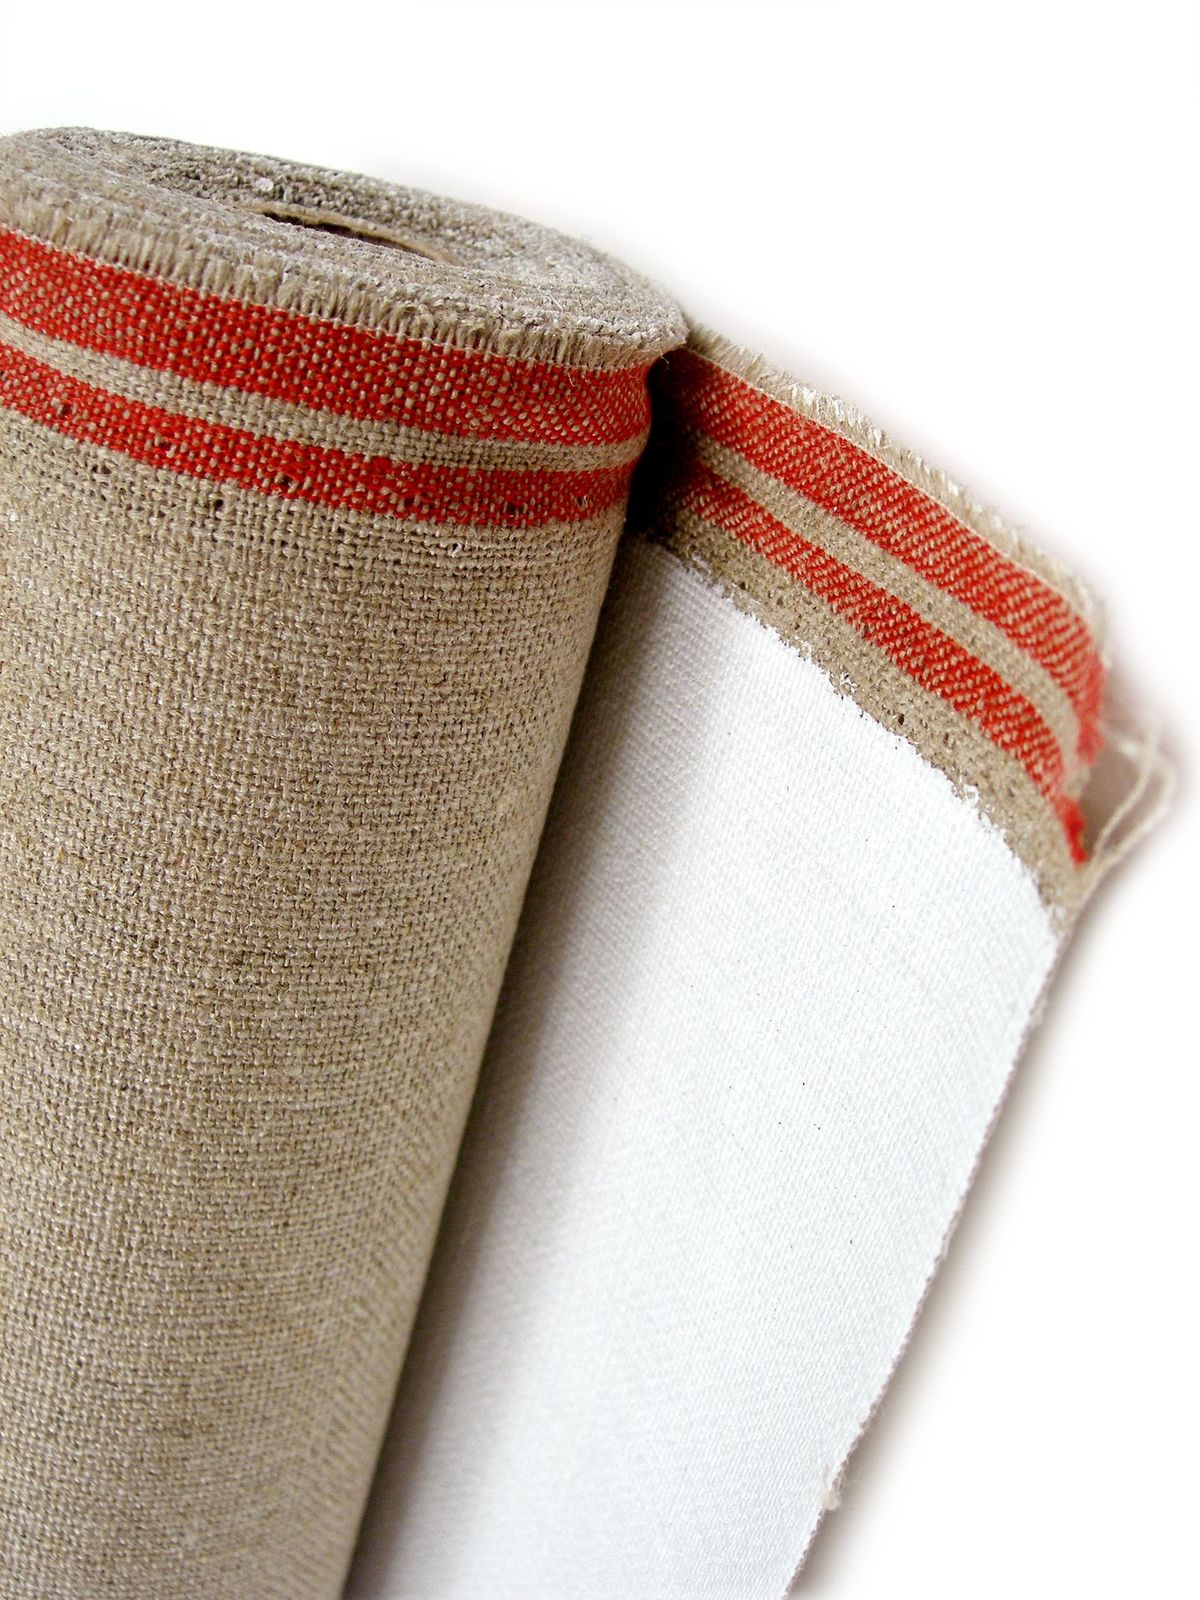 Galicia Primed Linen Canvas 54 In. X 6 Yd. Roll